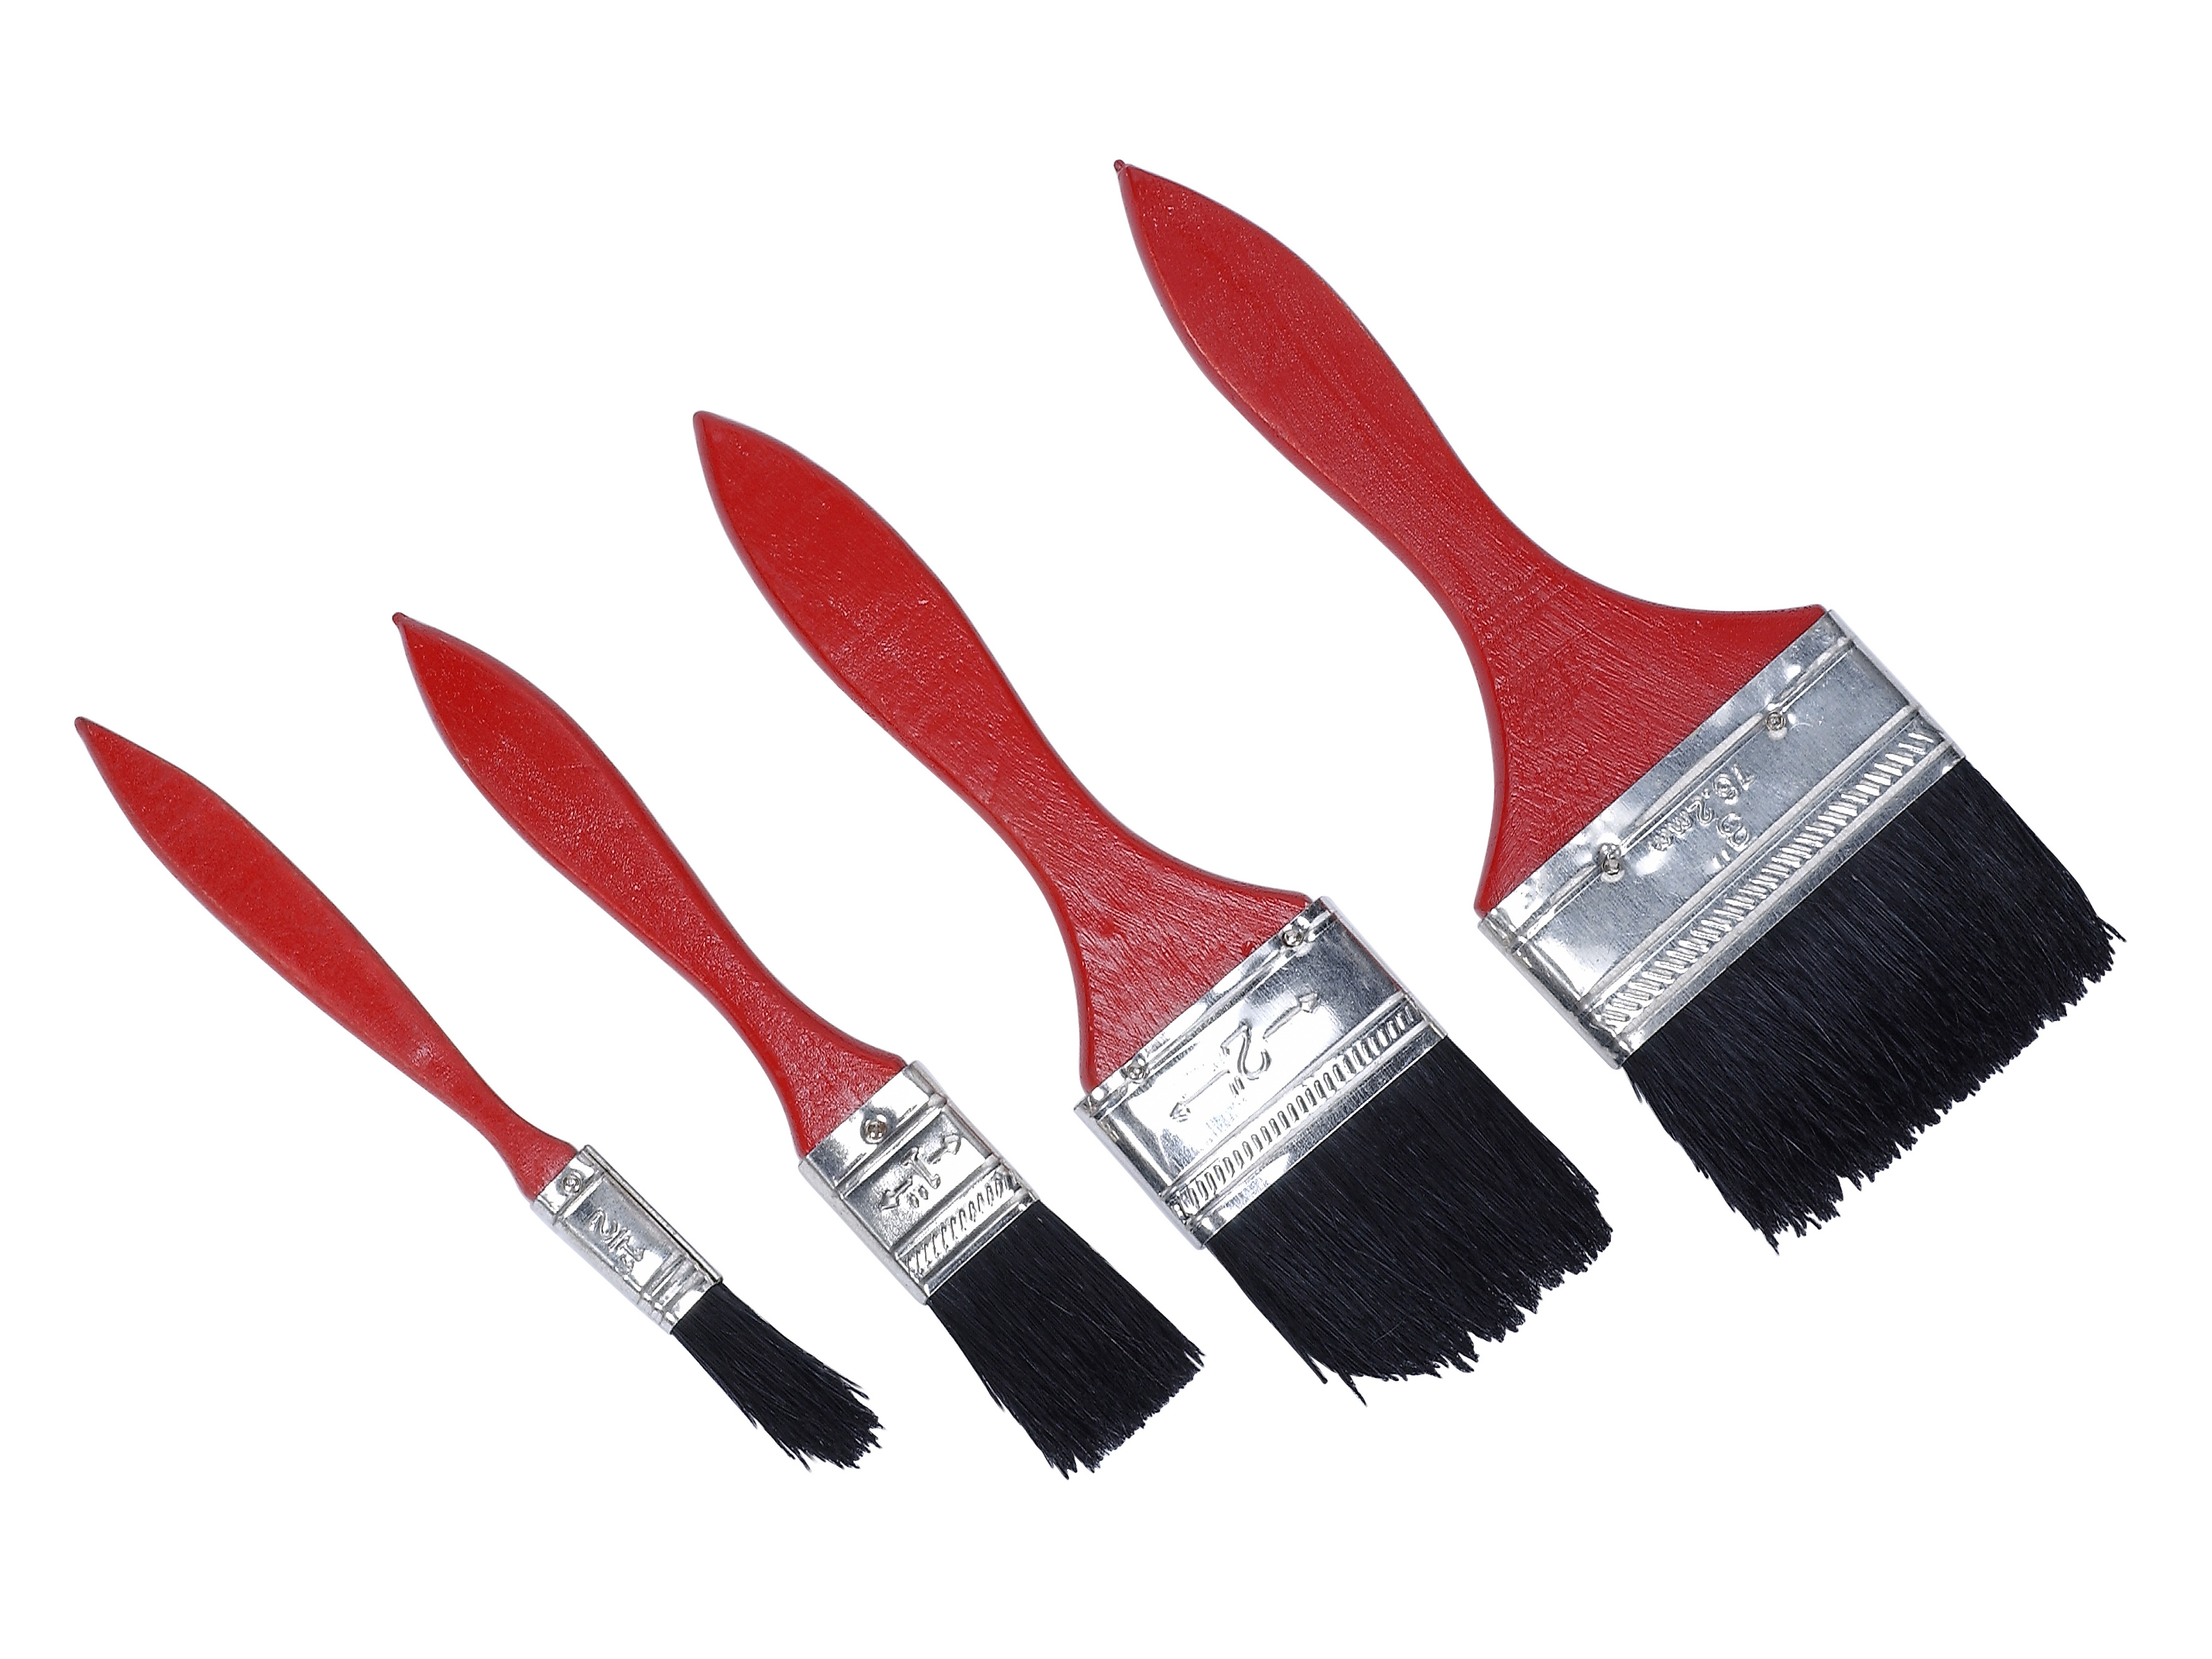 Decking Paint Brush,Decorating Brushes for Furniture Red Paint Brush Set Wall Painting and Fence